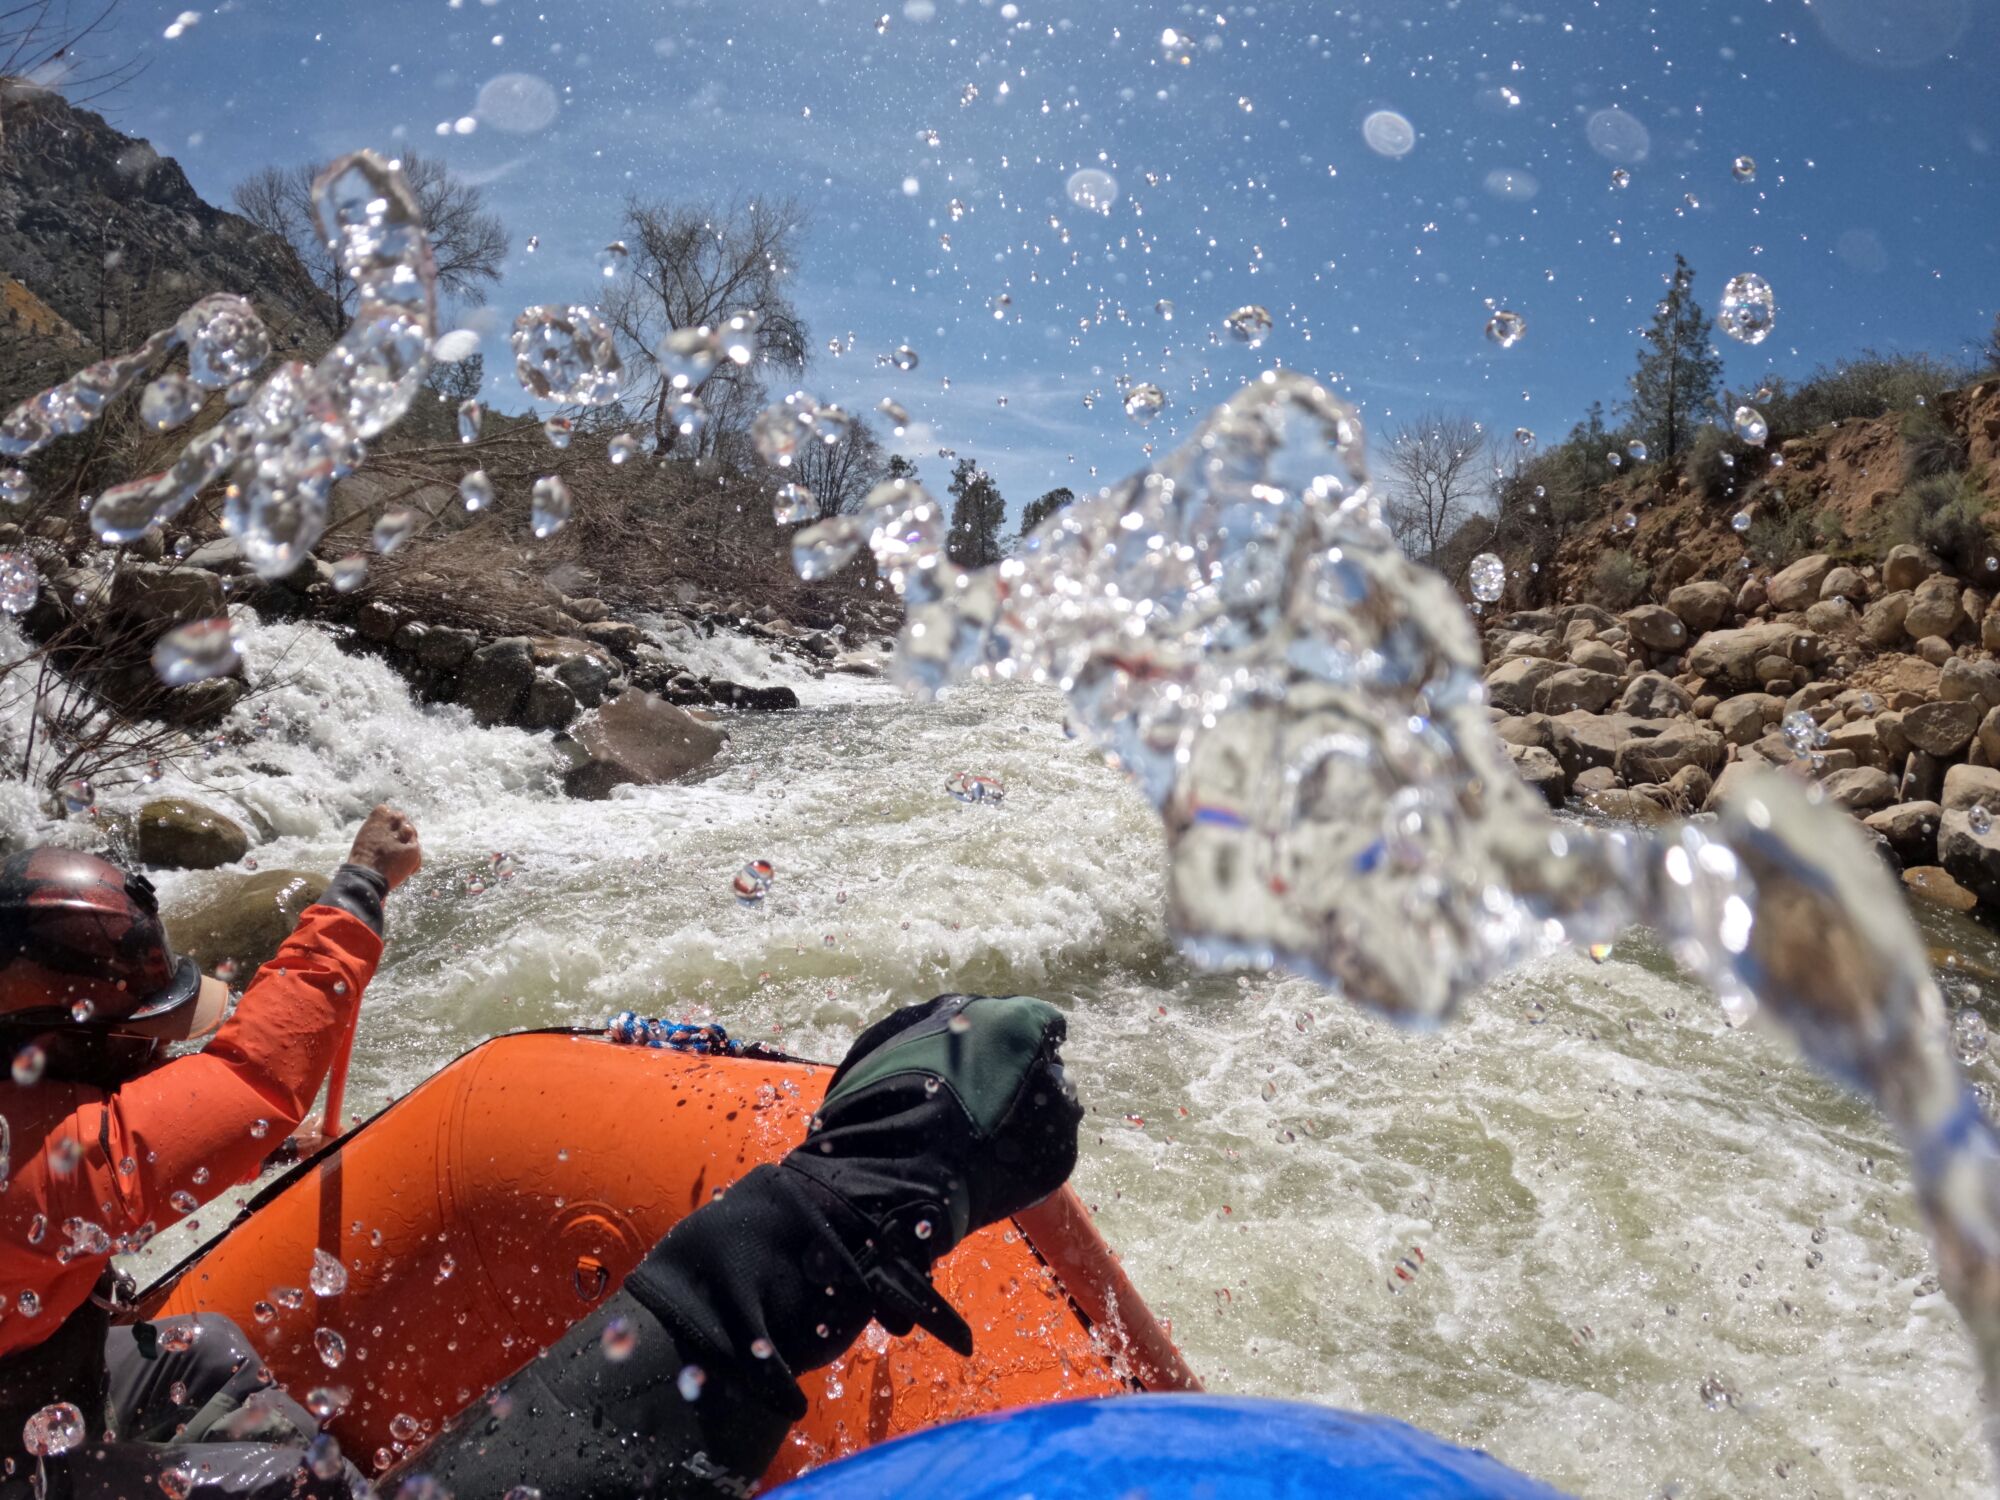 Rafters negotiate churning rapids during an early-season rafting tour on the Upper Kern River.